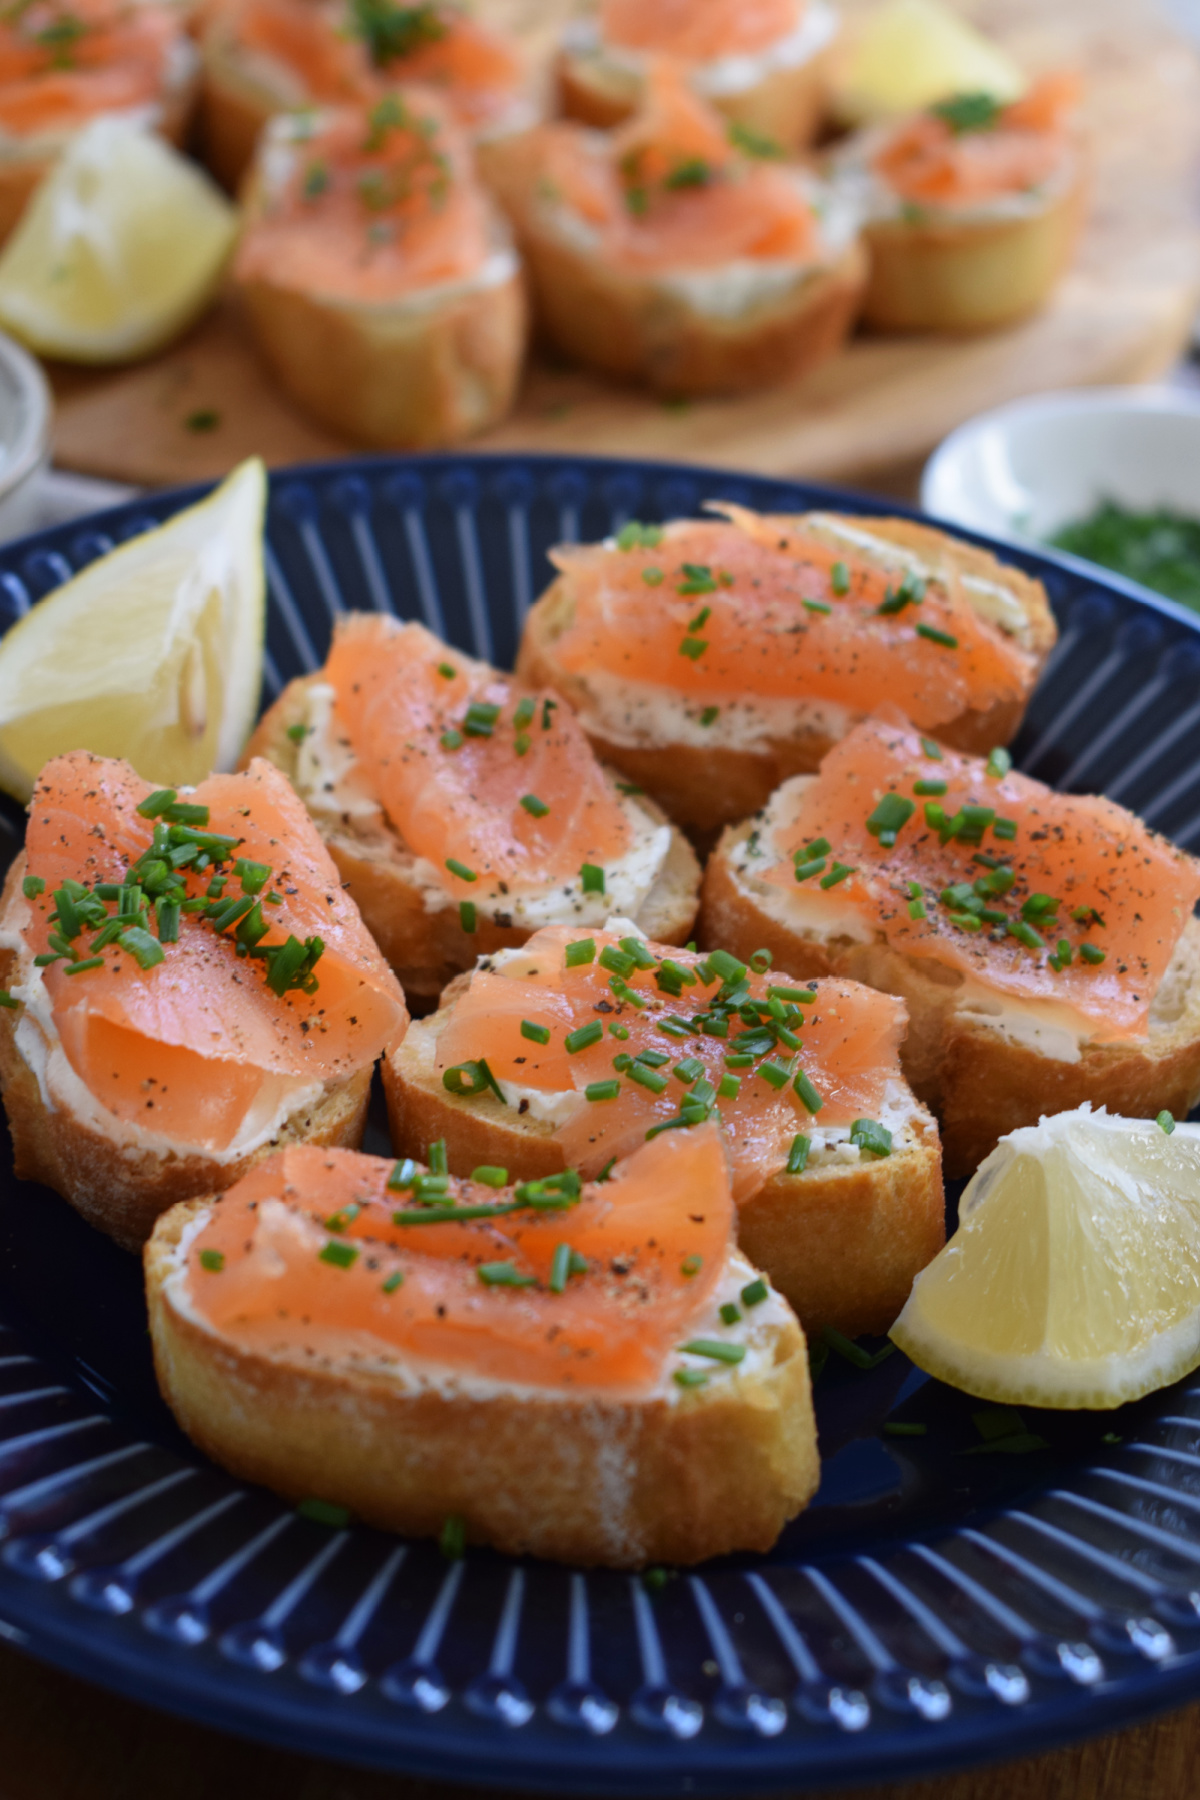 https://juliascuisine.com/wp-content/uploads/2021/12/SMOKED-SALMON-AND-CREAM-CHEESE-CANAPES-IMAGE5.jpg